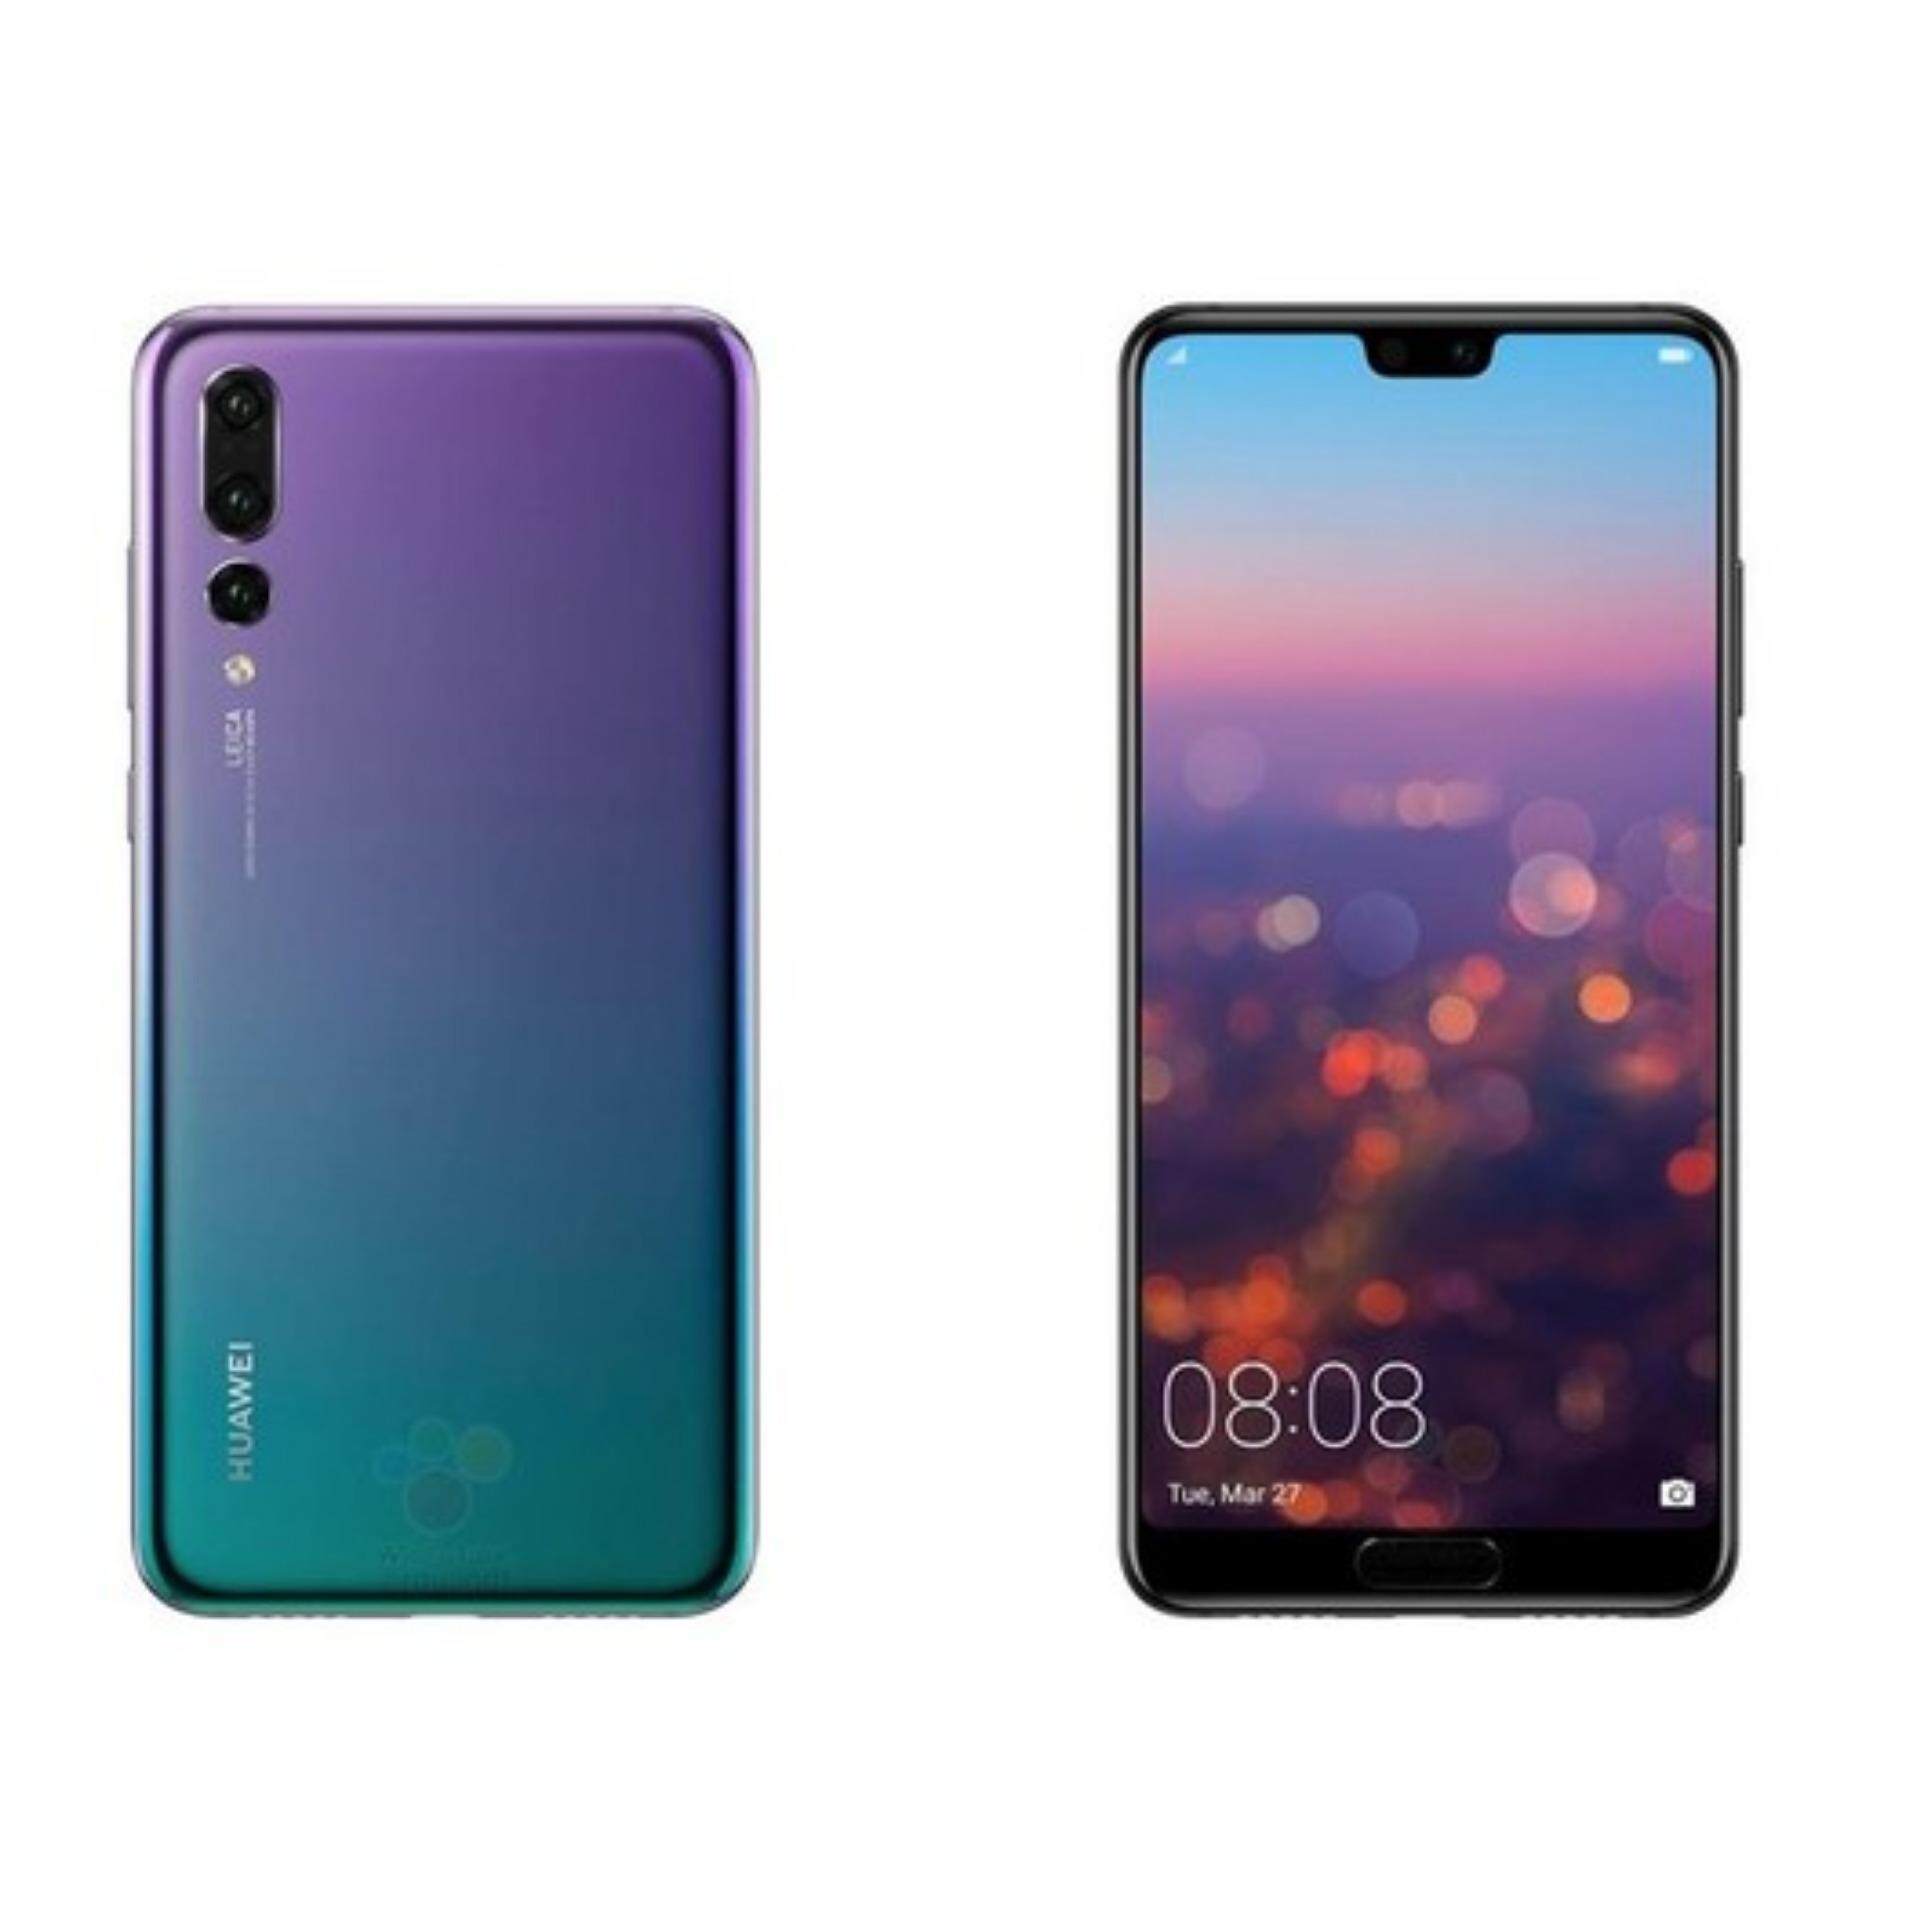 Huawei P20 Pro Price in Malaysia & Specs | TechNave